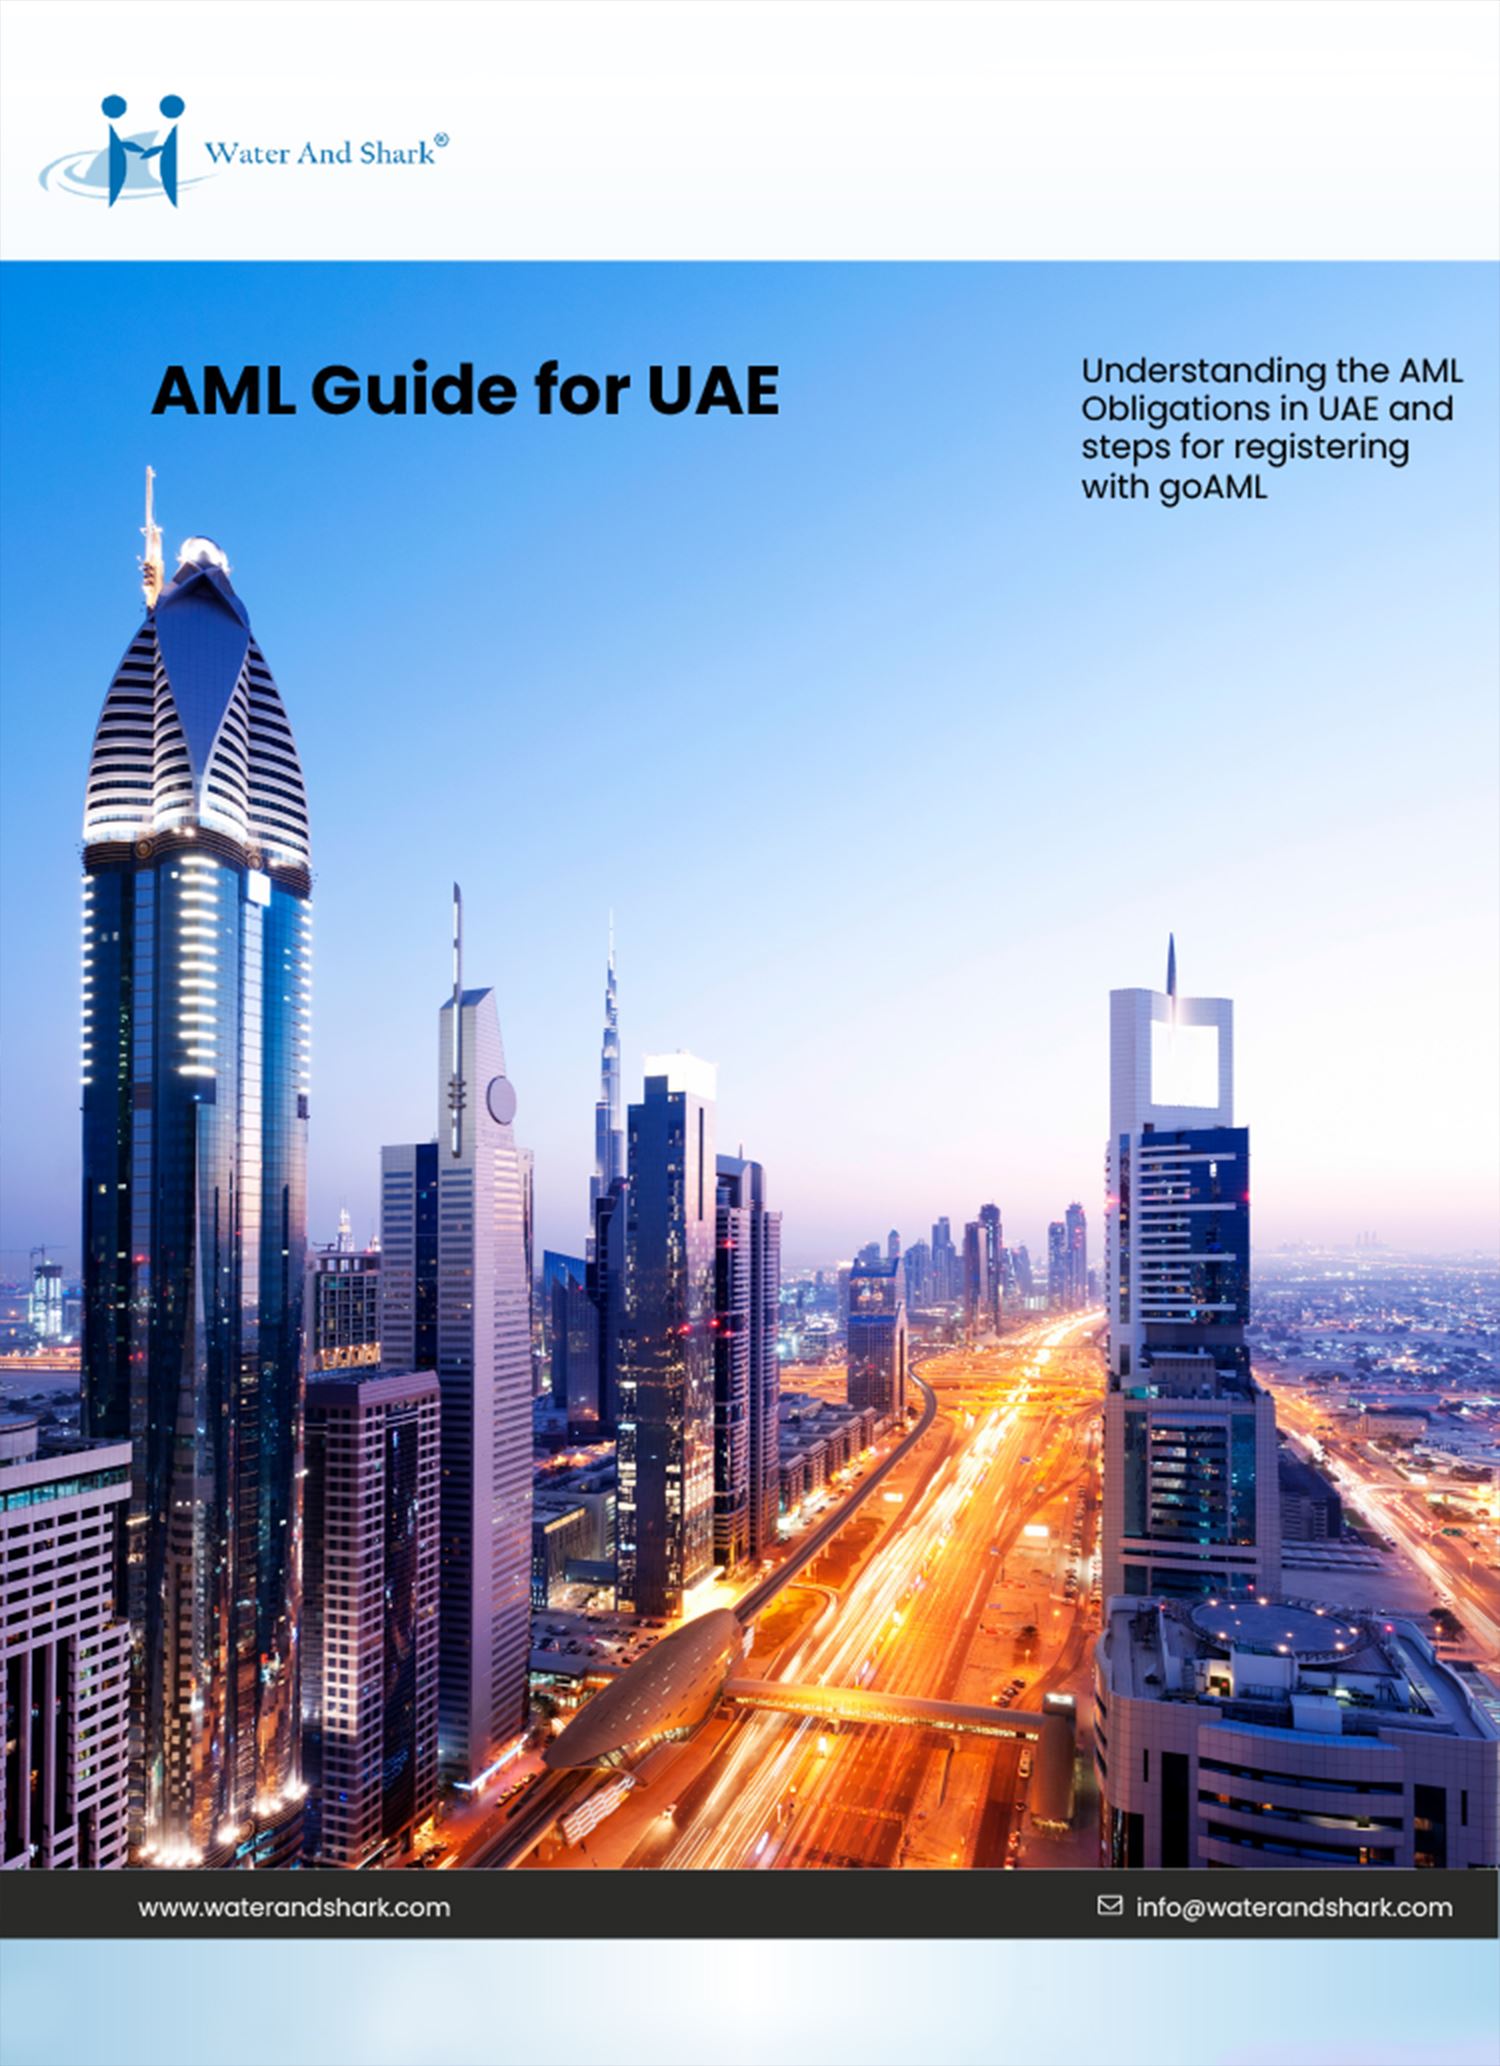 aml-obligations-in-uae-pdfcover.jpg